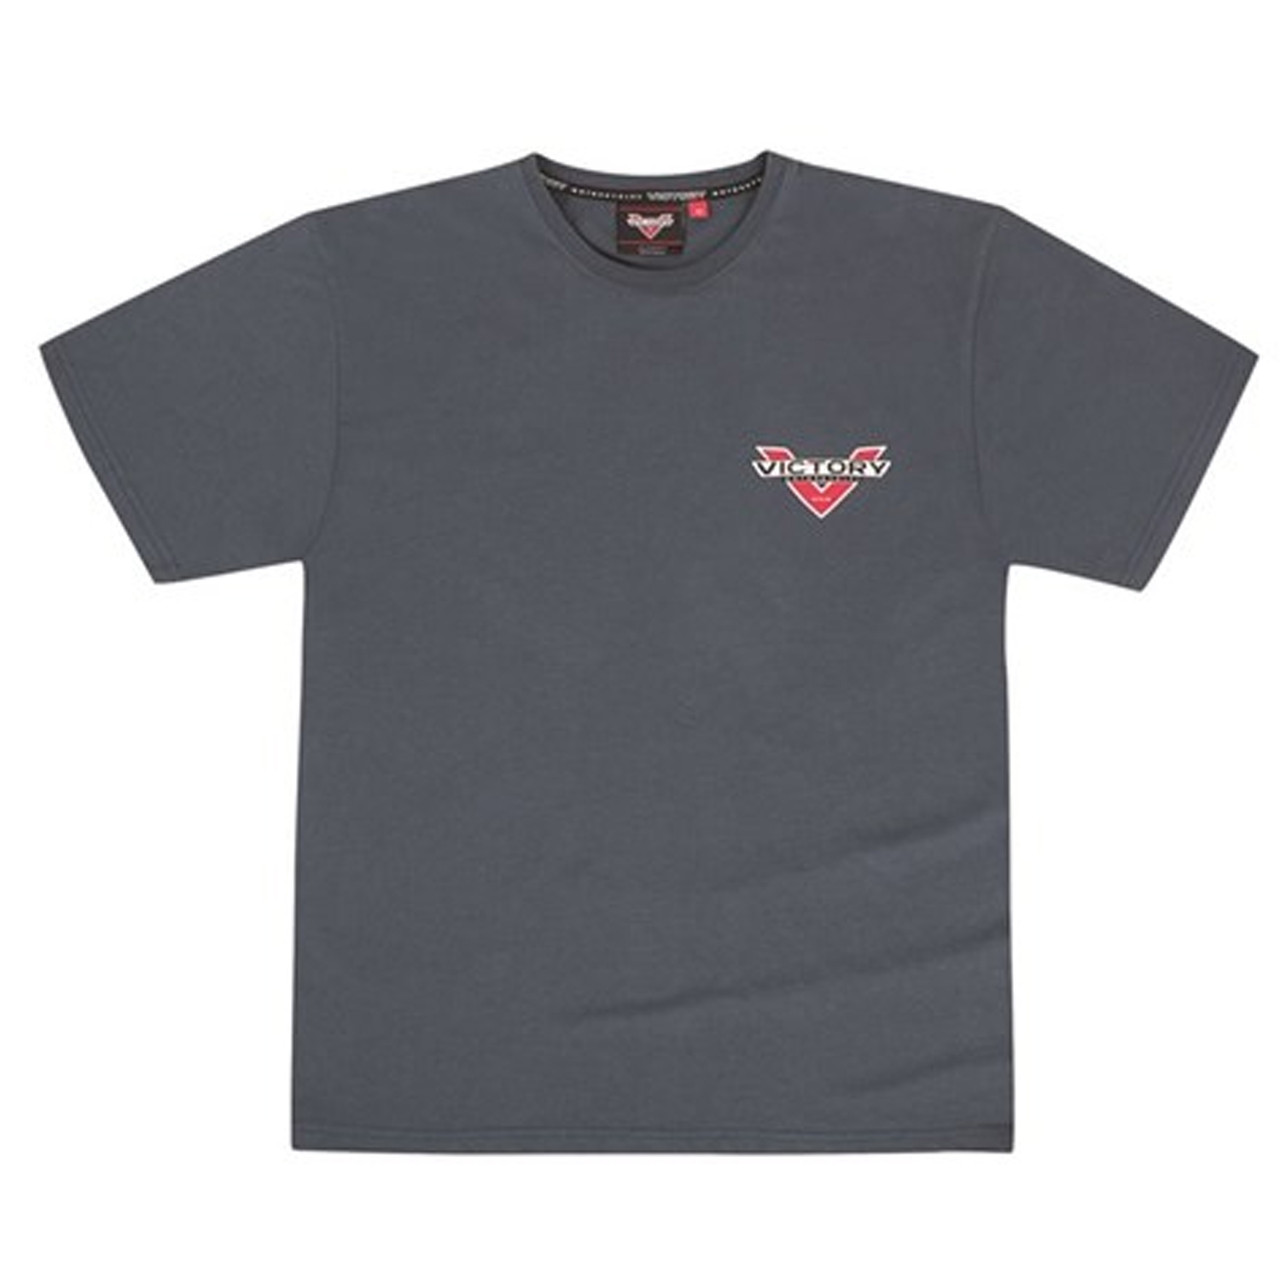 Victory Motorcycle New OEM Men's Grey Speed Tee Shirt, Small, 286630202